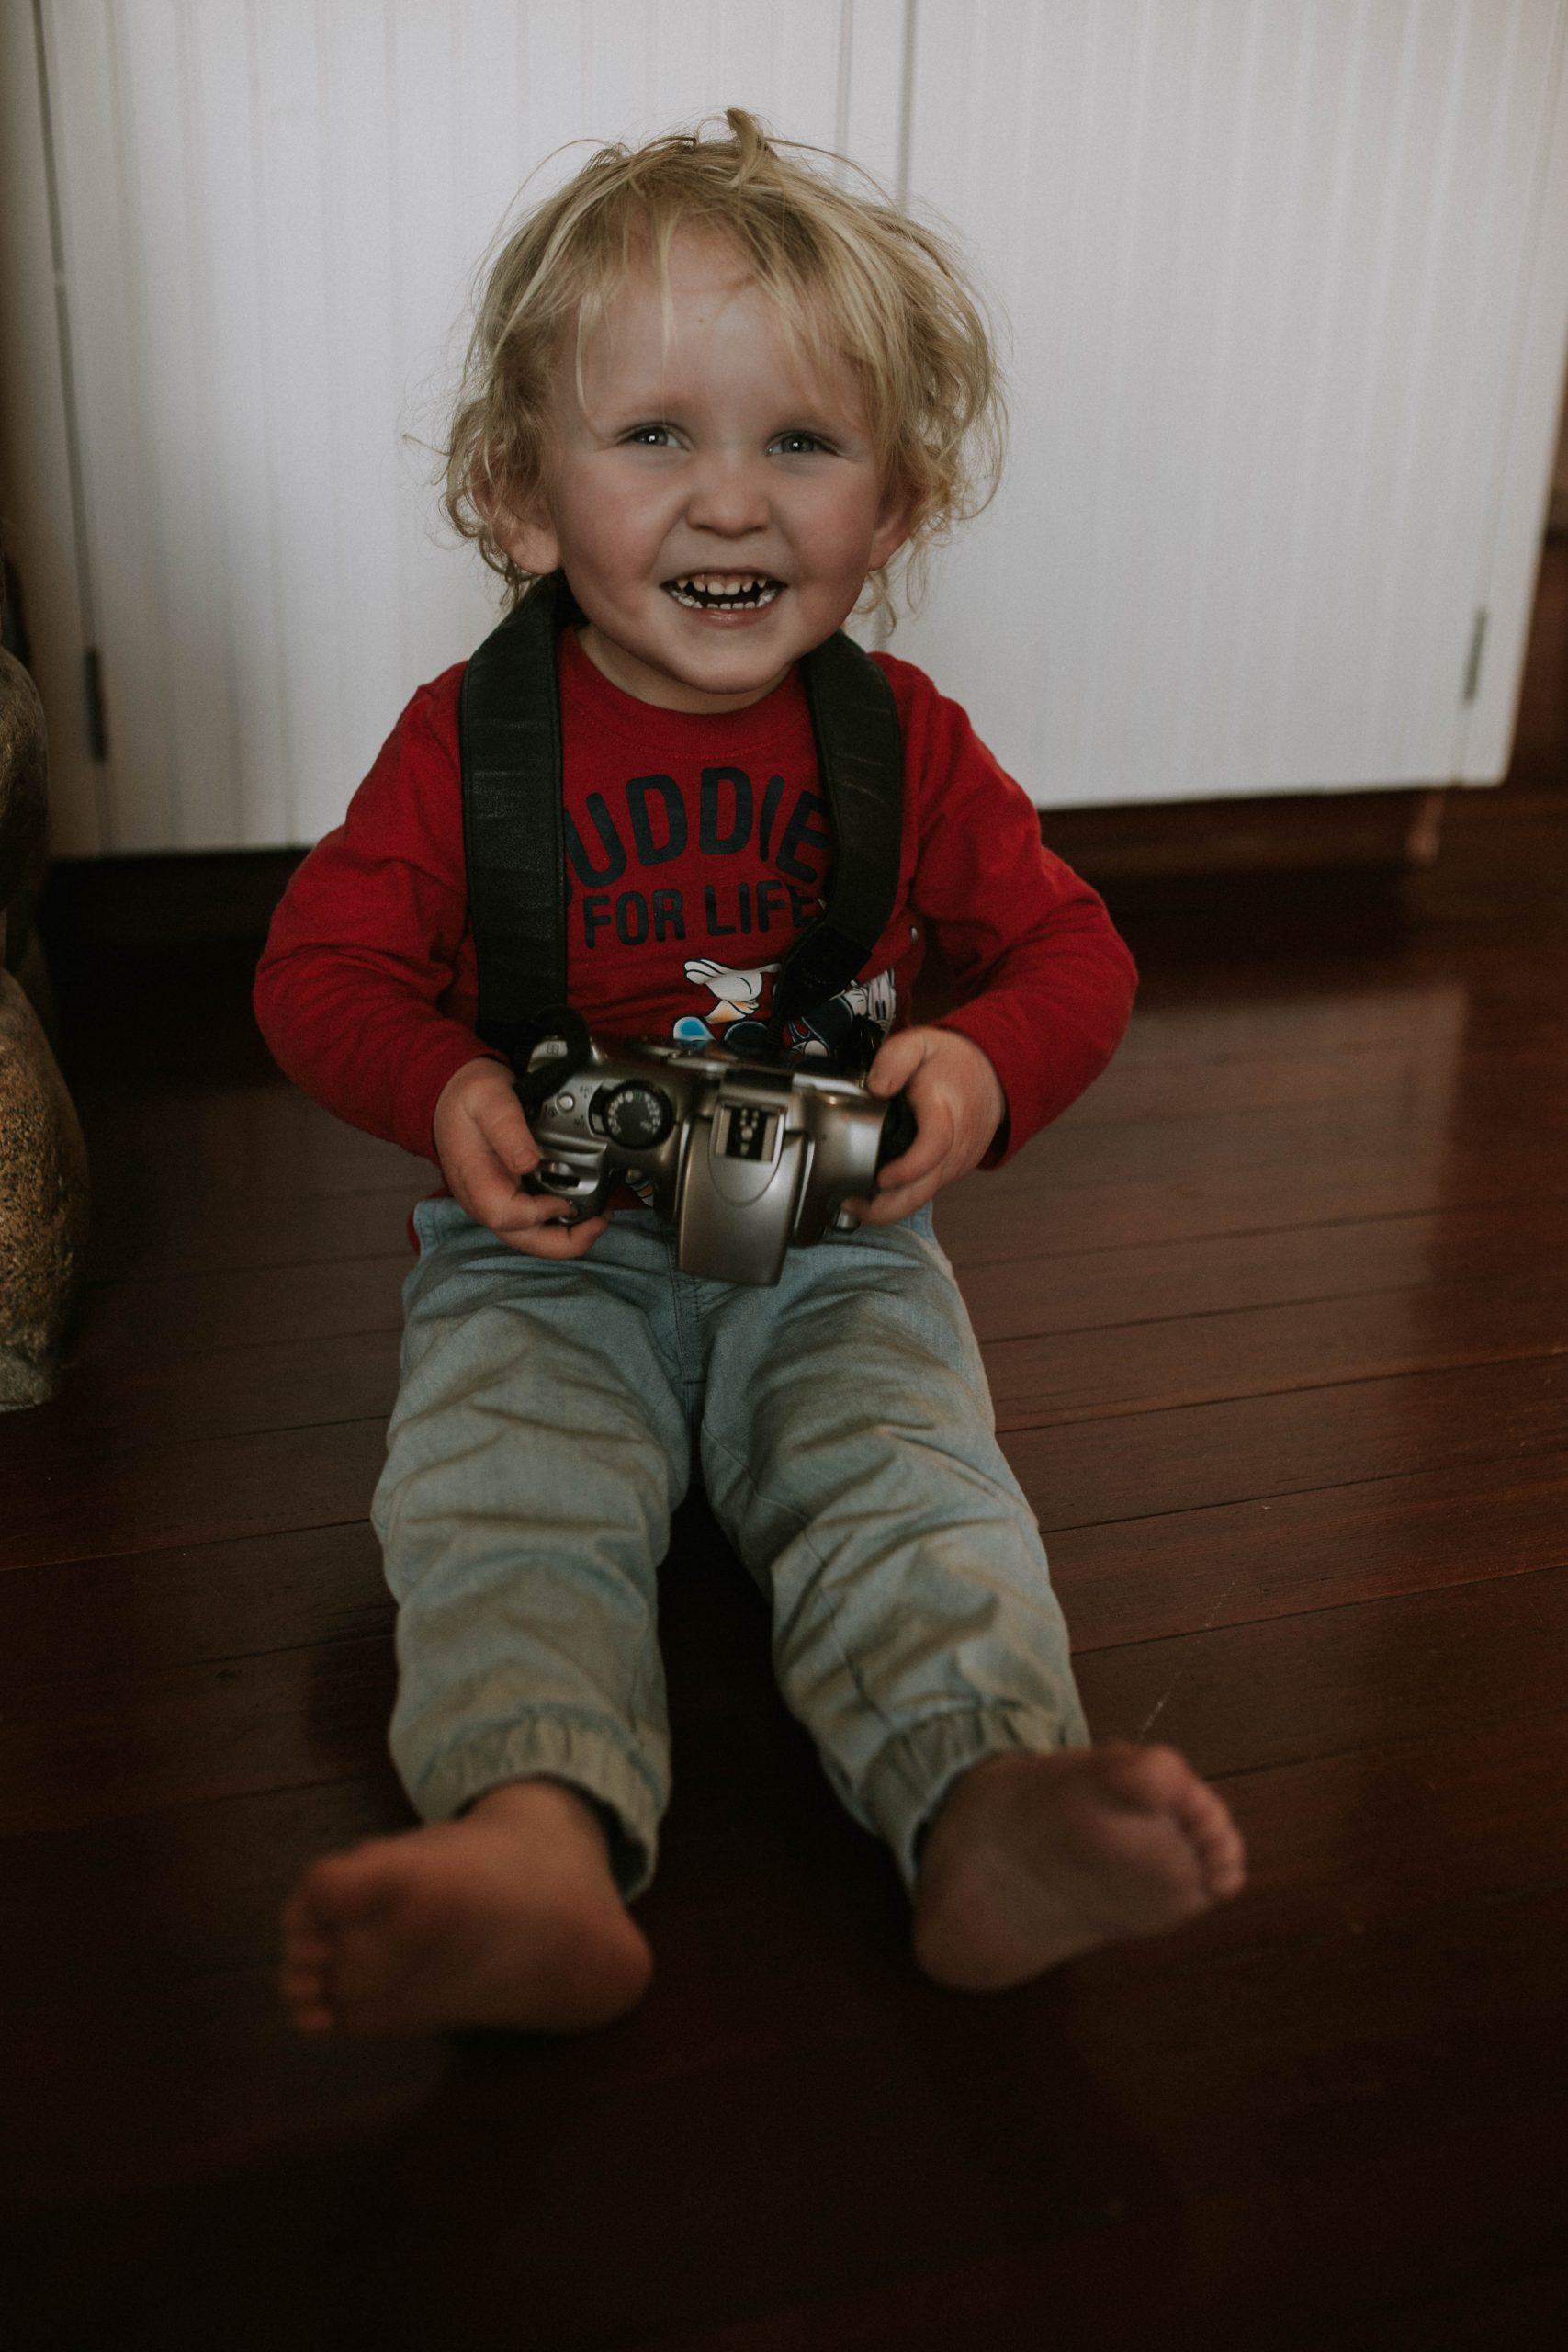 My son loves my old cannon camera to play photographer with